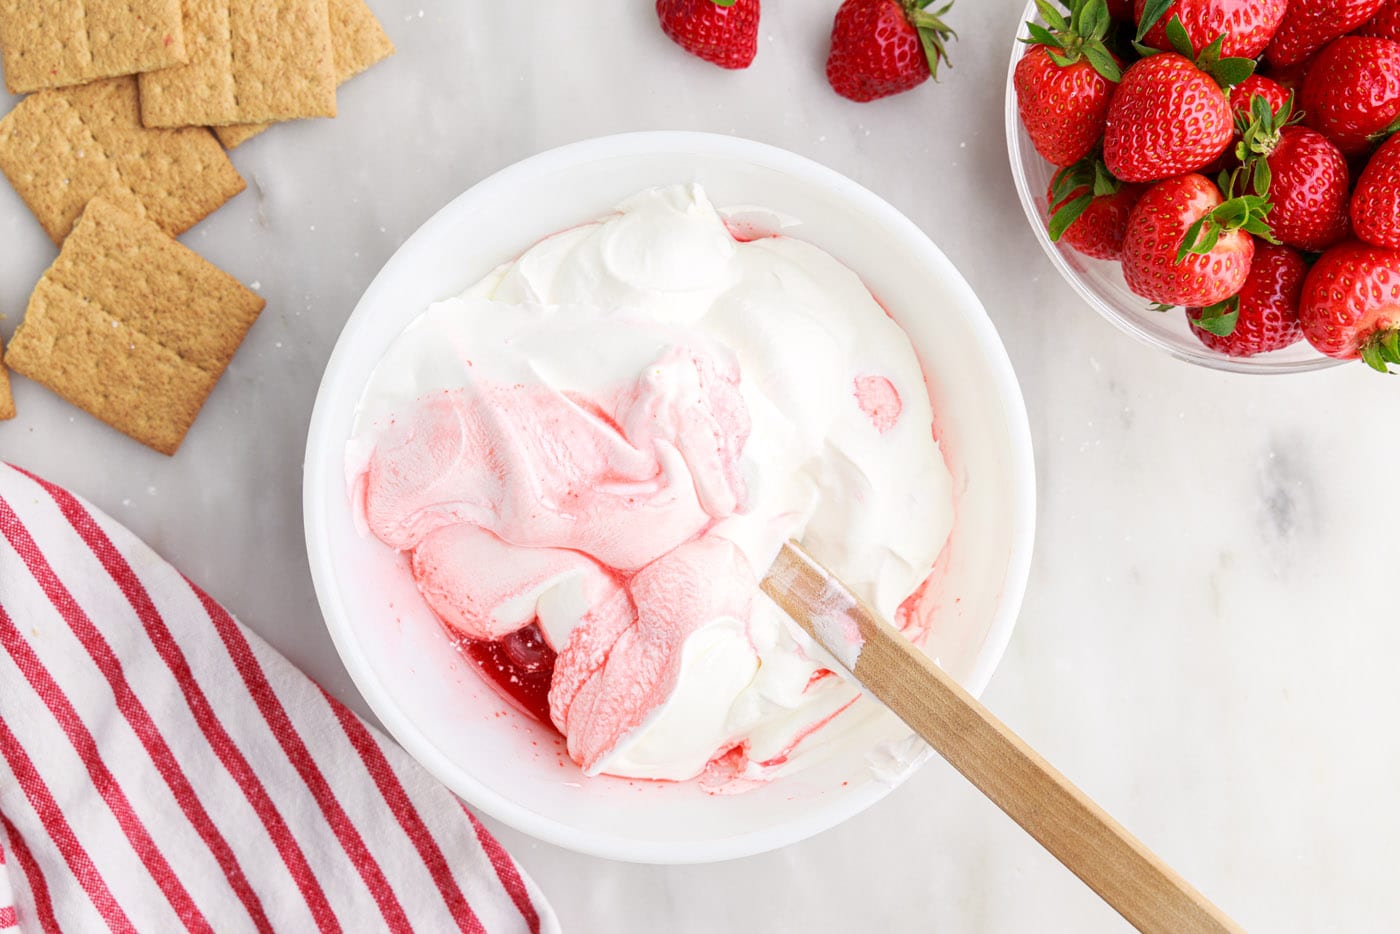 wooden spoon folding whipped topping into strawberry mixture